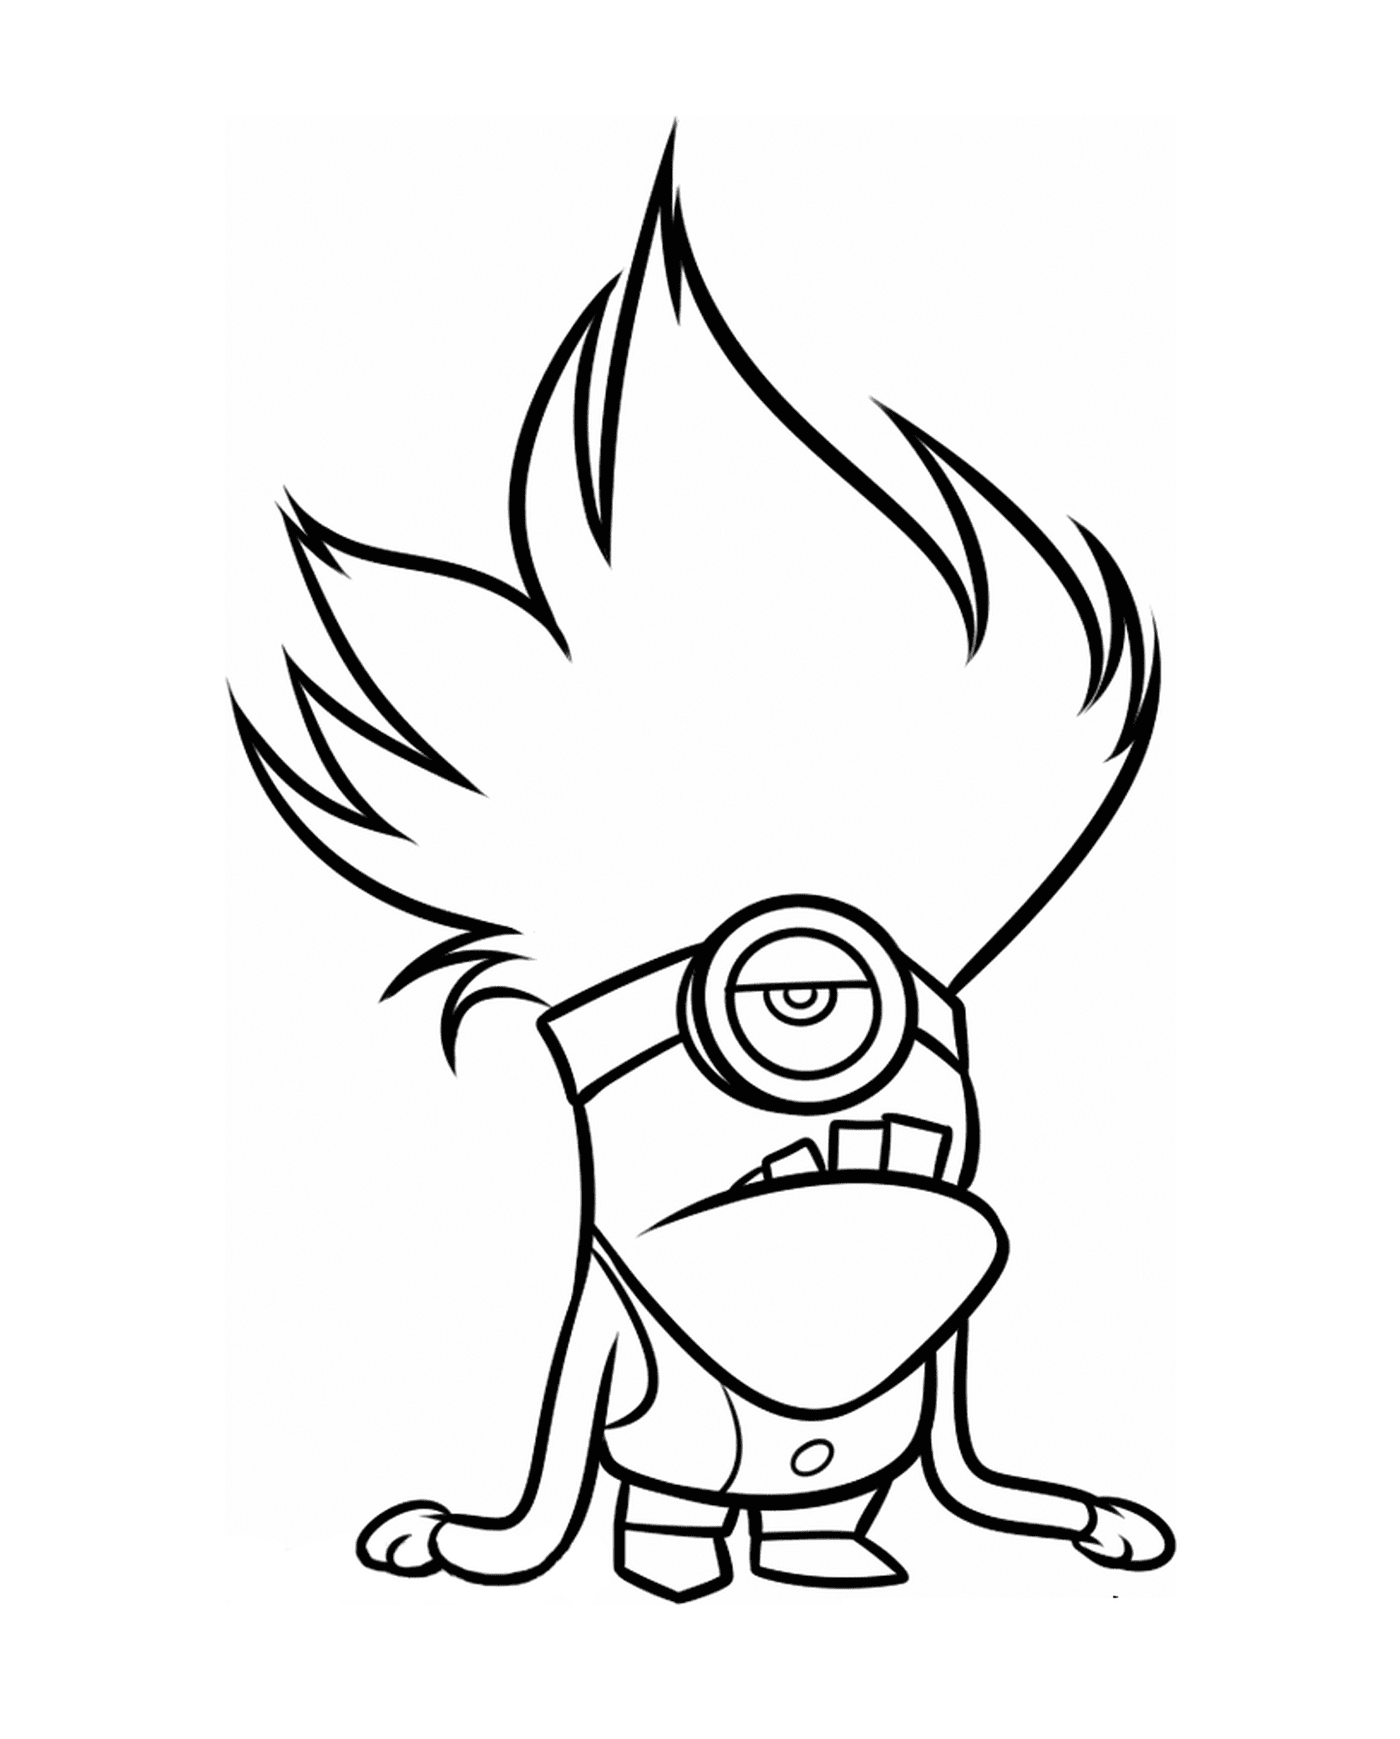  Minion with funny hair, animated character 